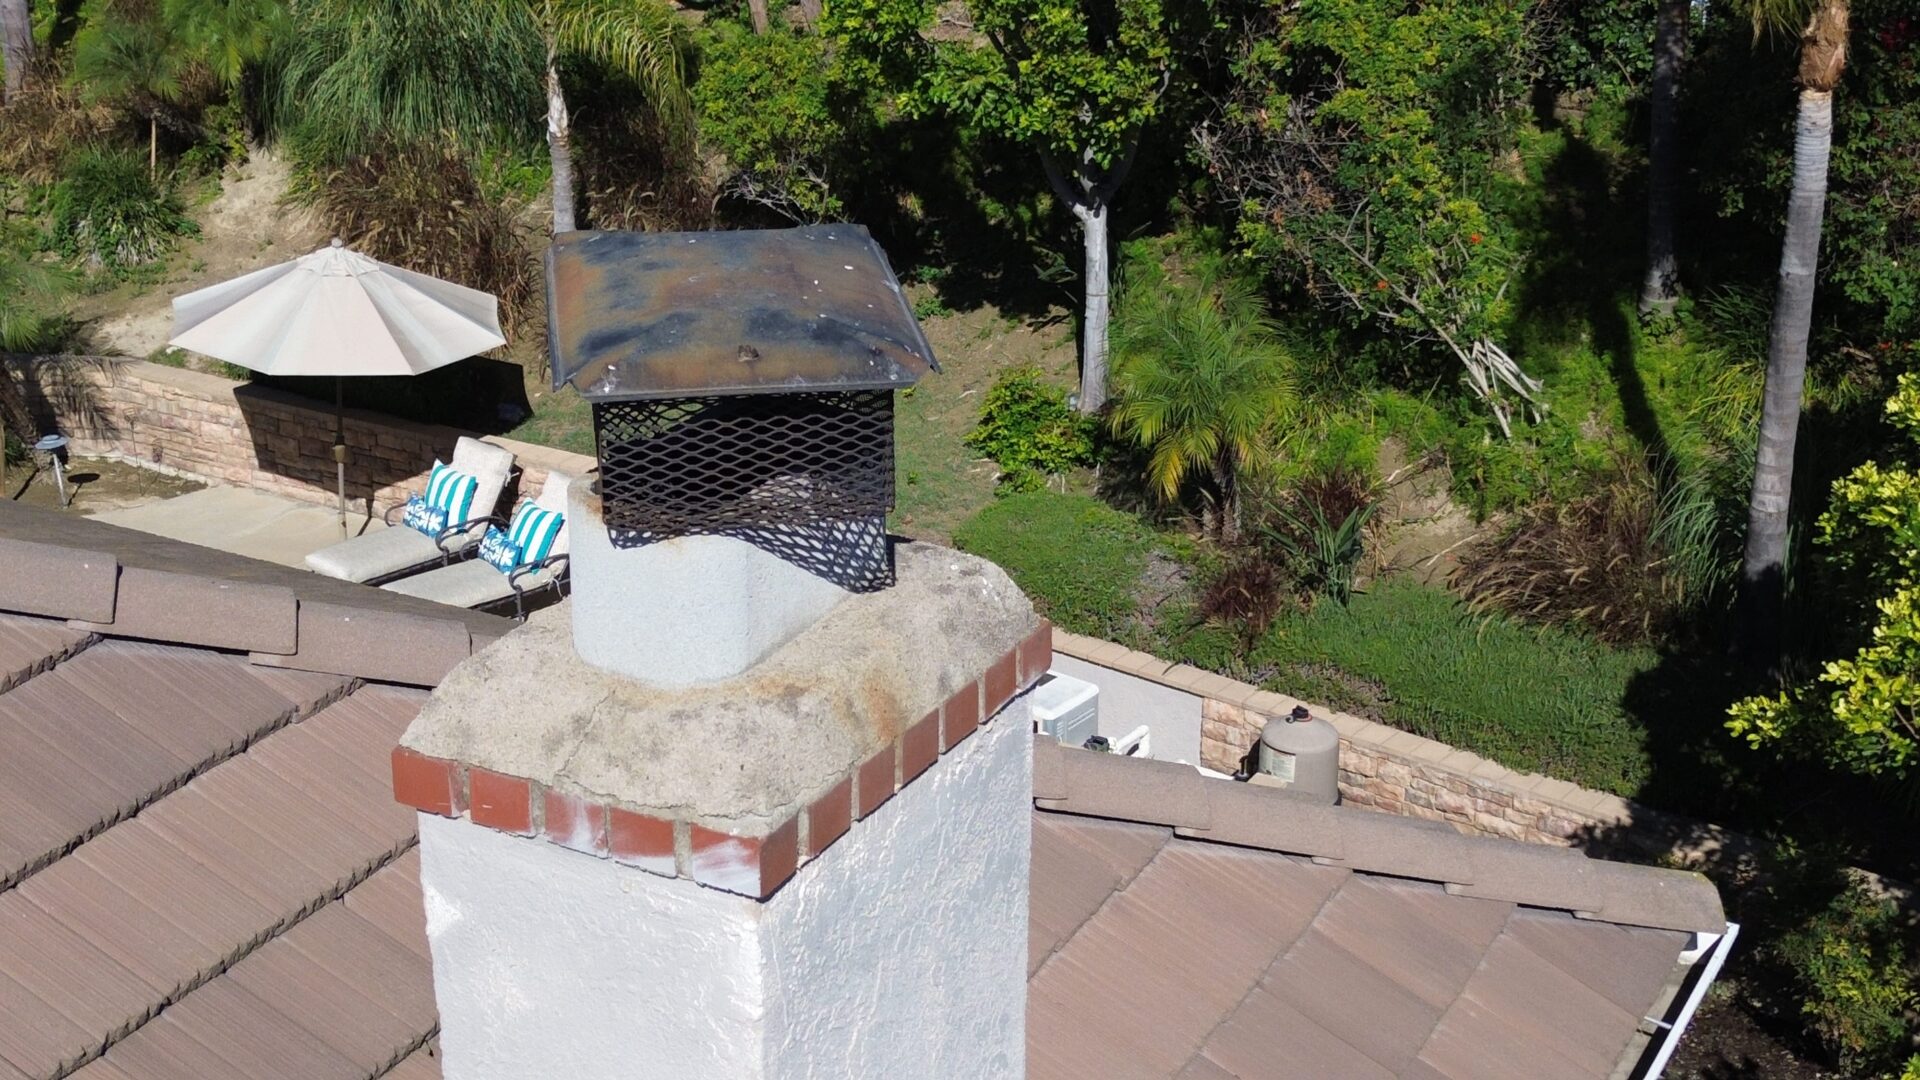 chimney inspections in orange county ca